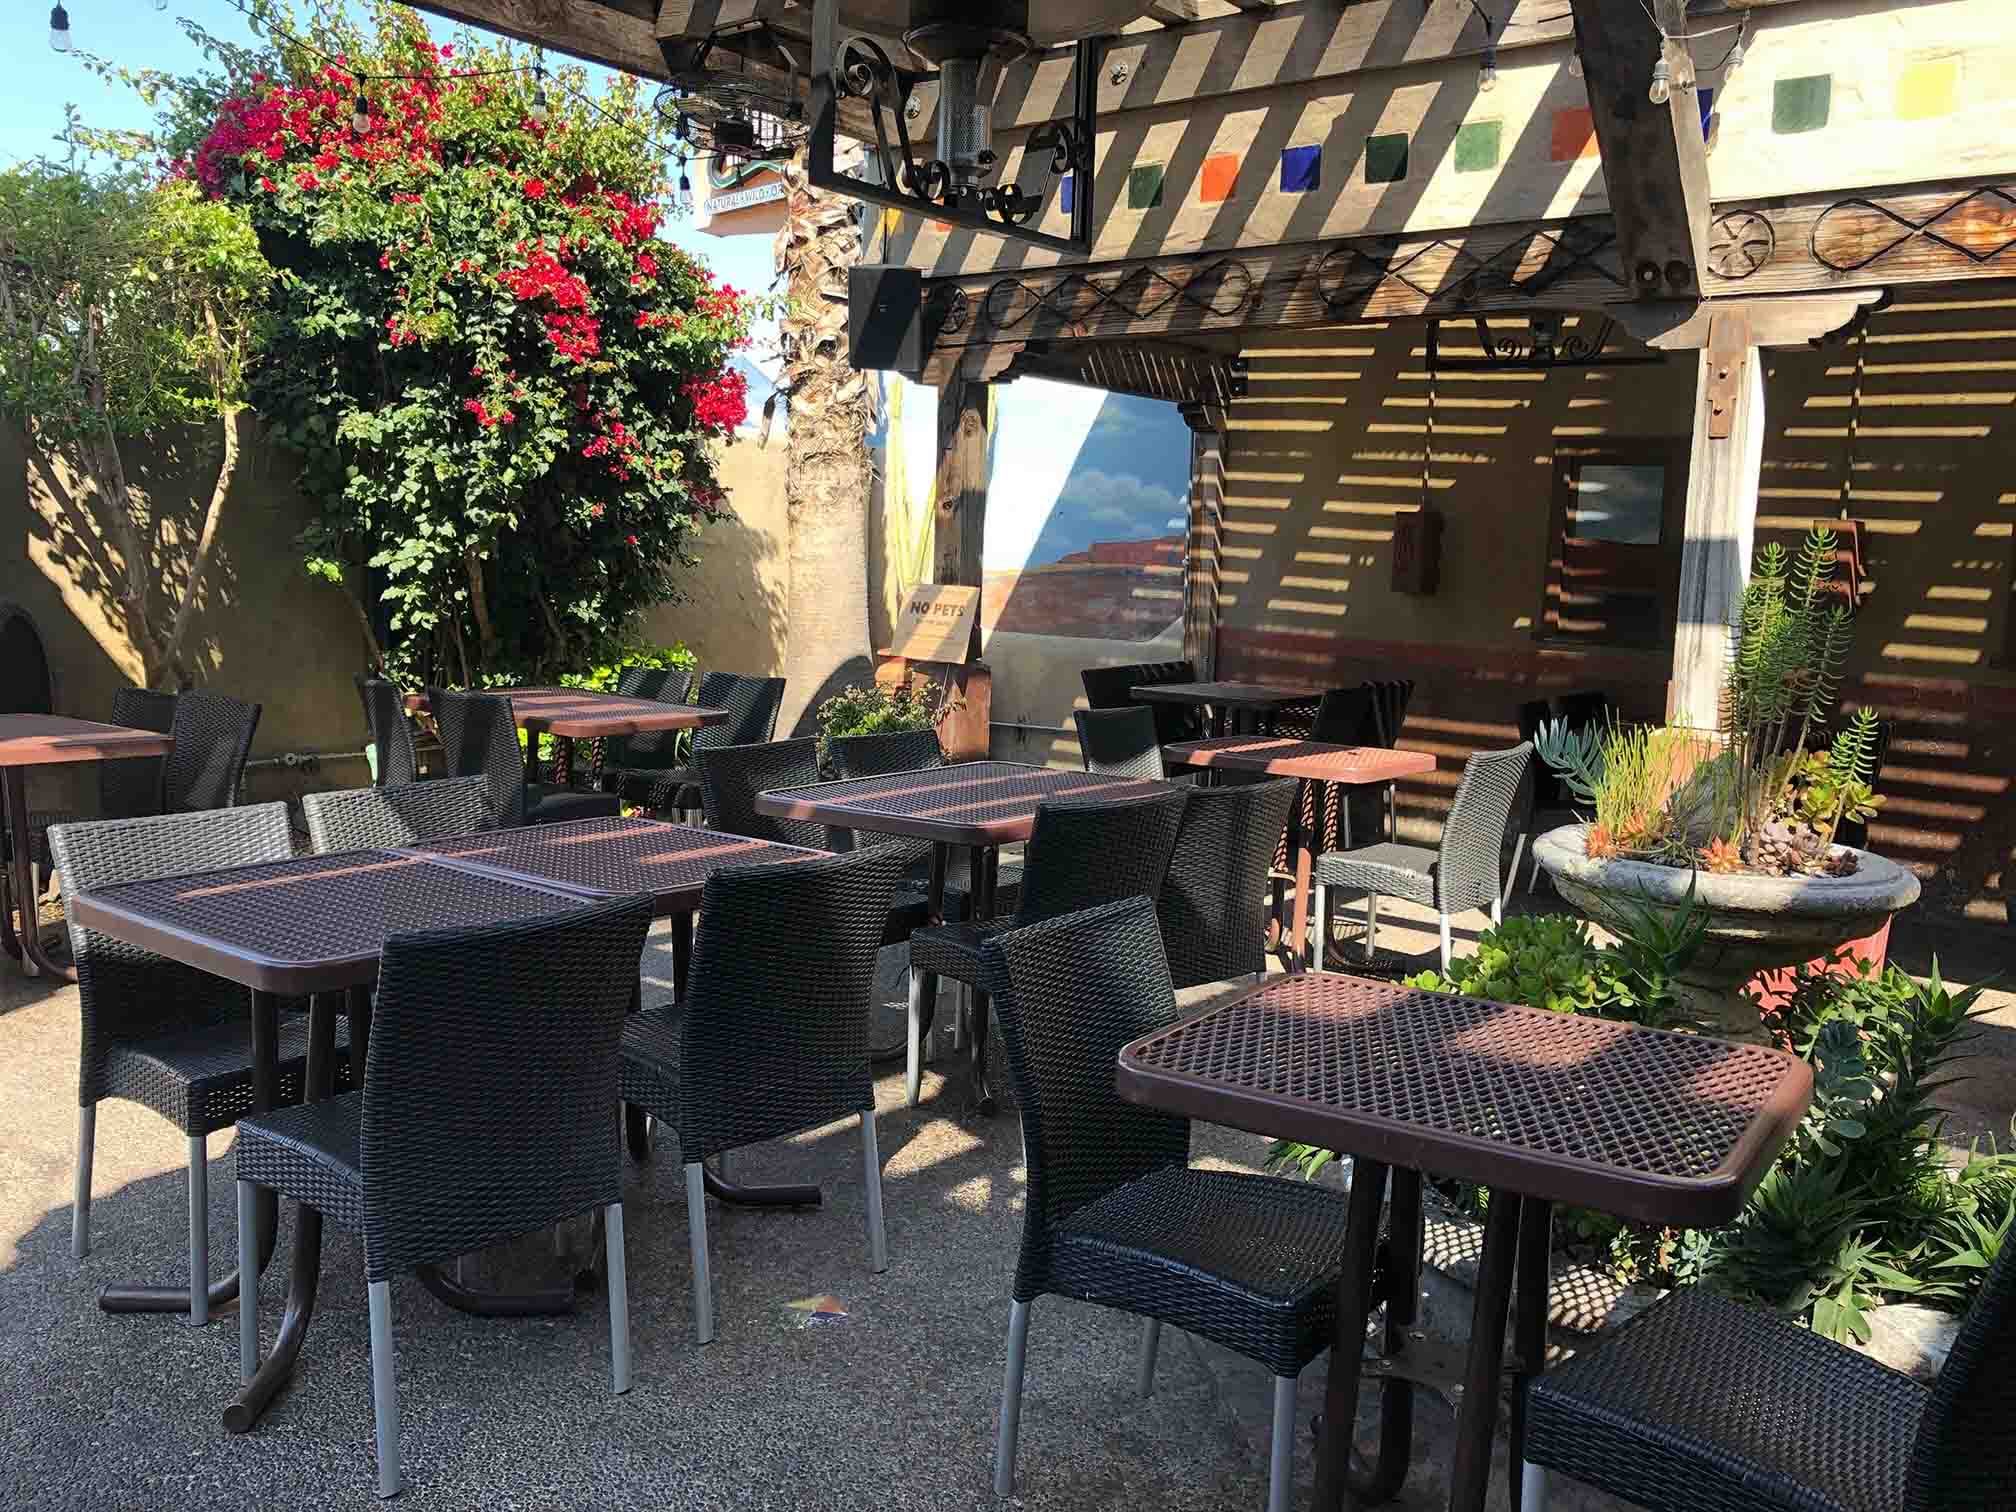 Our outdoor covered patio at Aqui in downtown Willow Glen. with our patio tables and chairs.